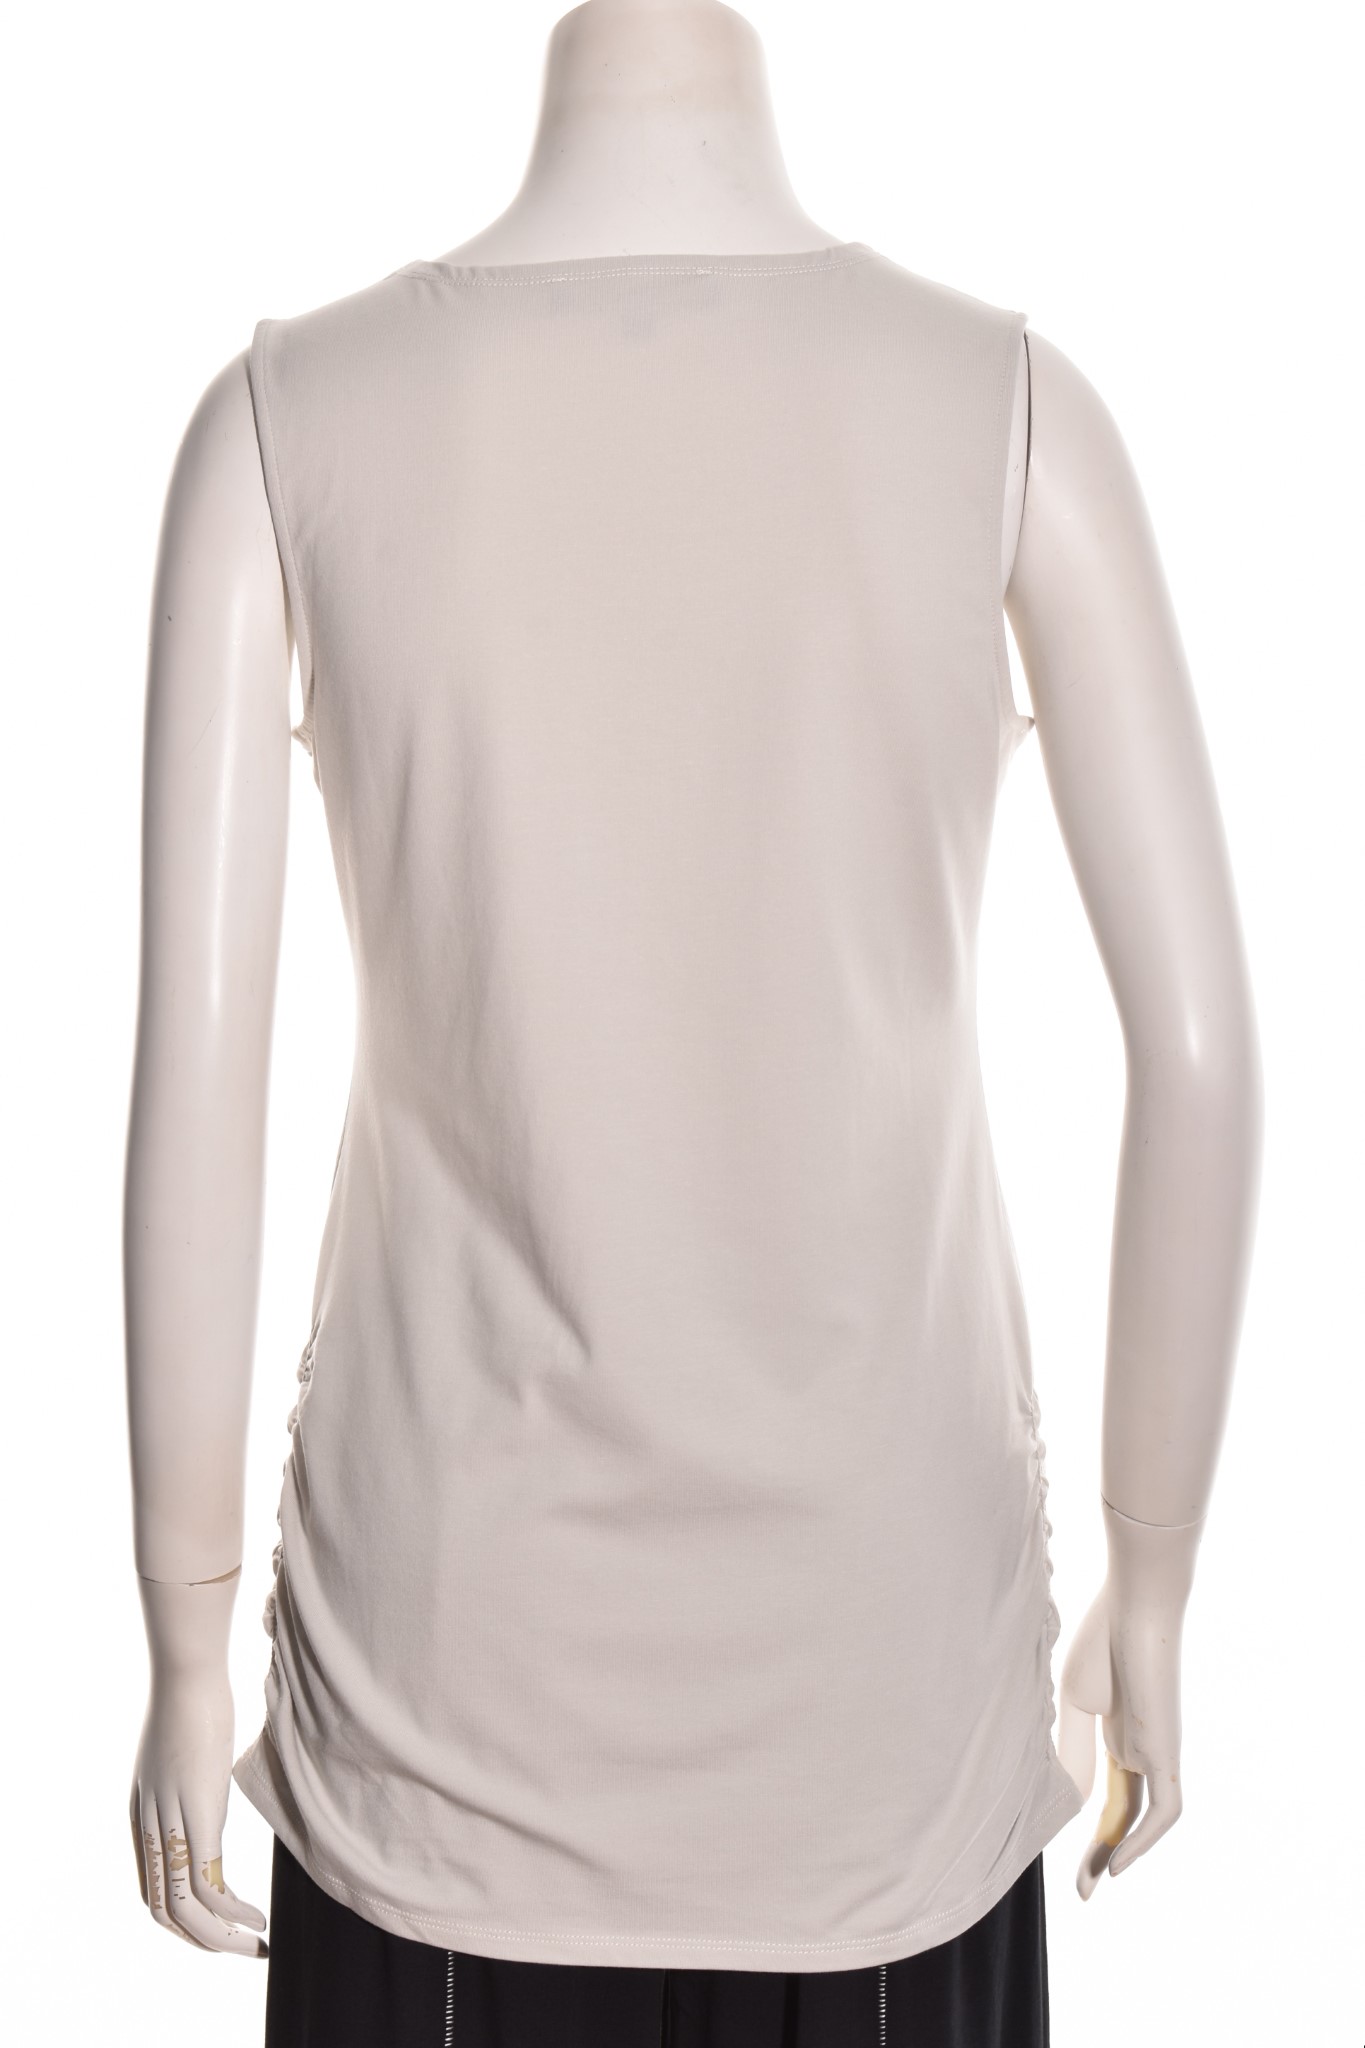 Liv. By Habitat. Essential Layers Ruched Long Tank. - Lea's